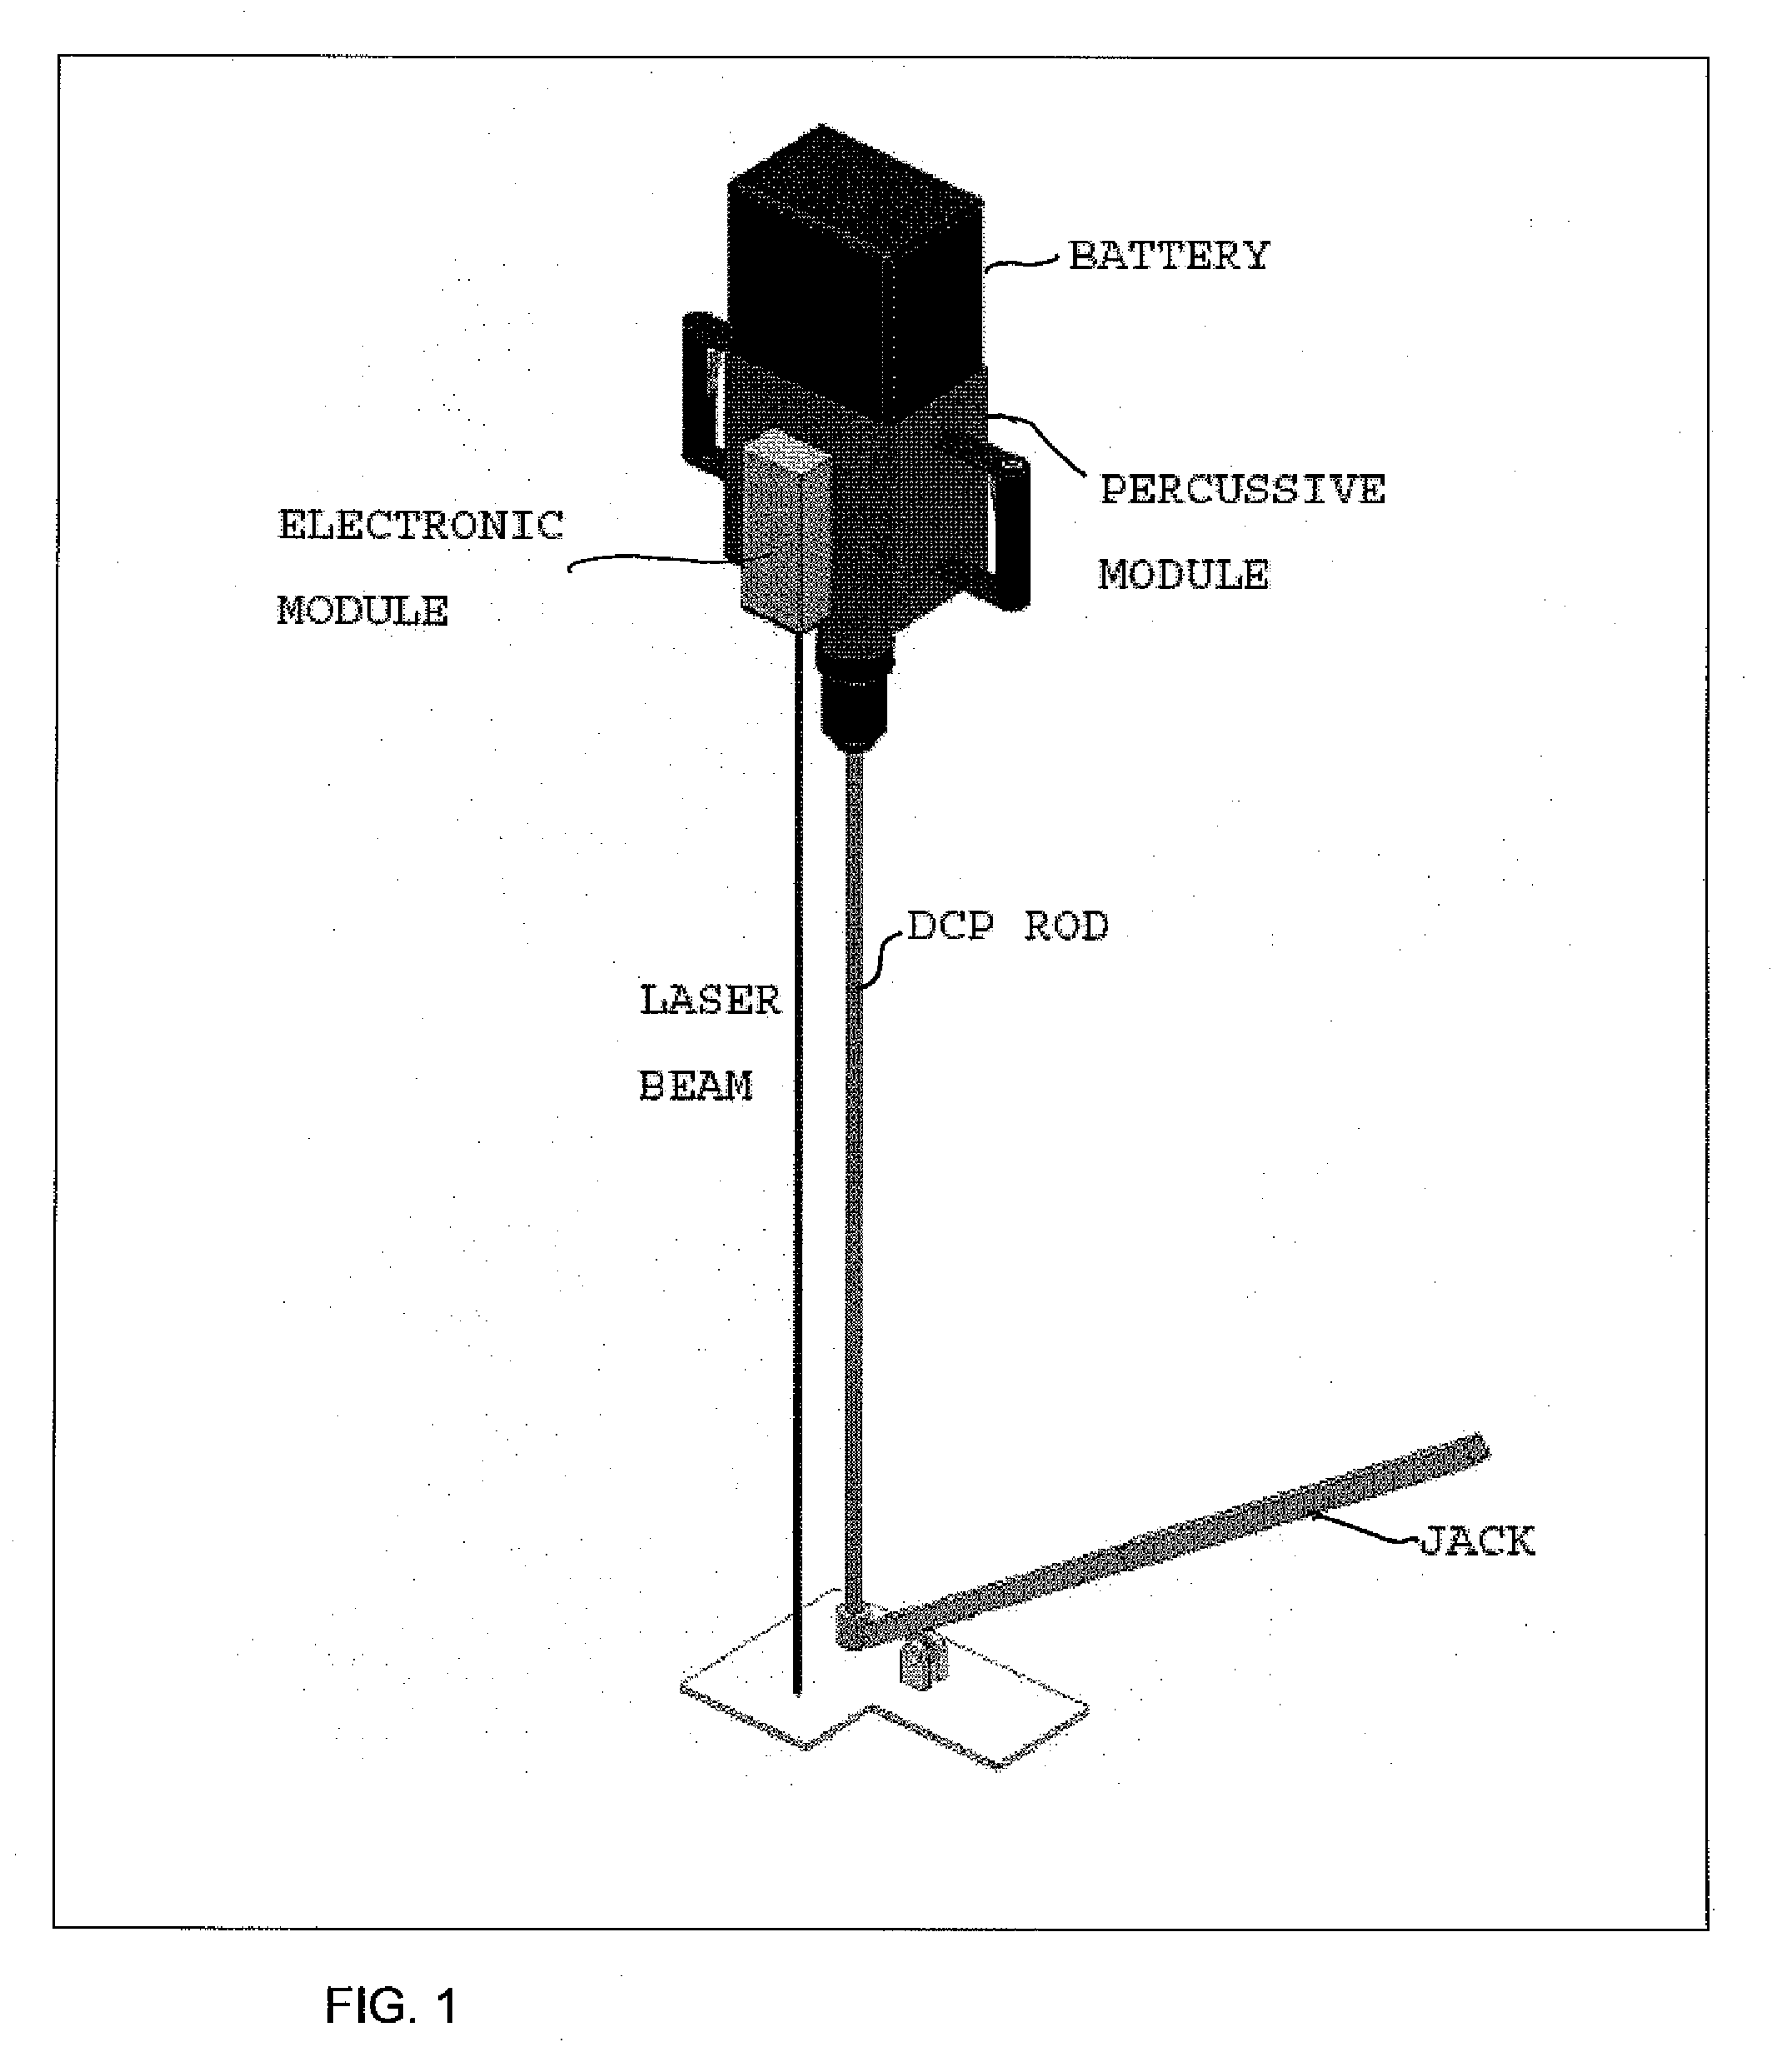 Penetrometer with electronically-controlled hammering module